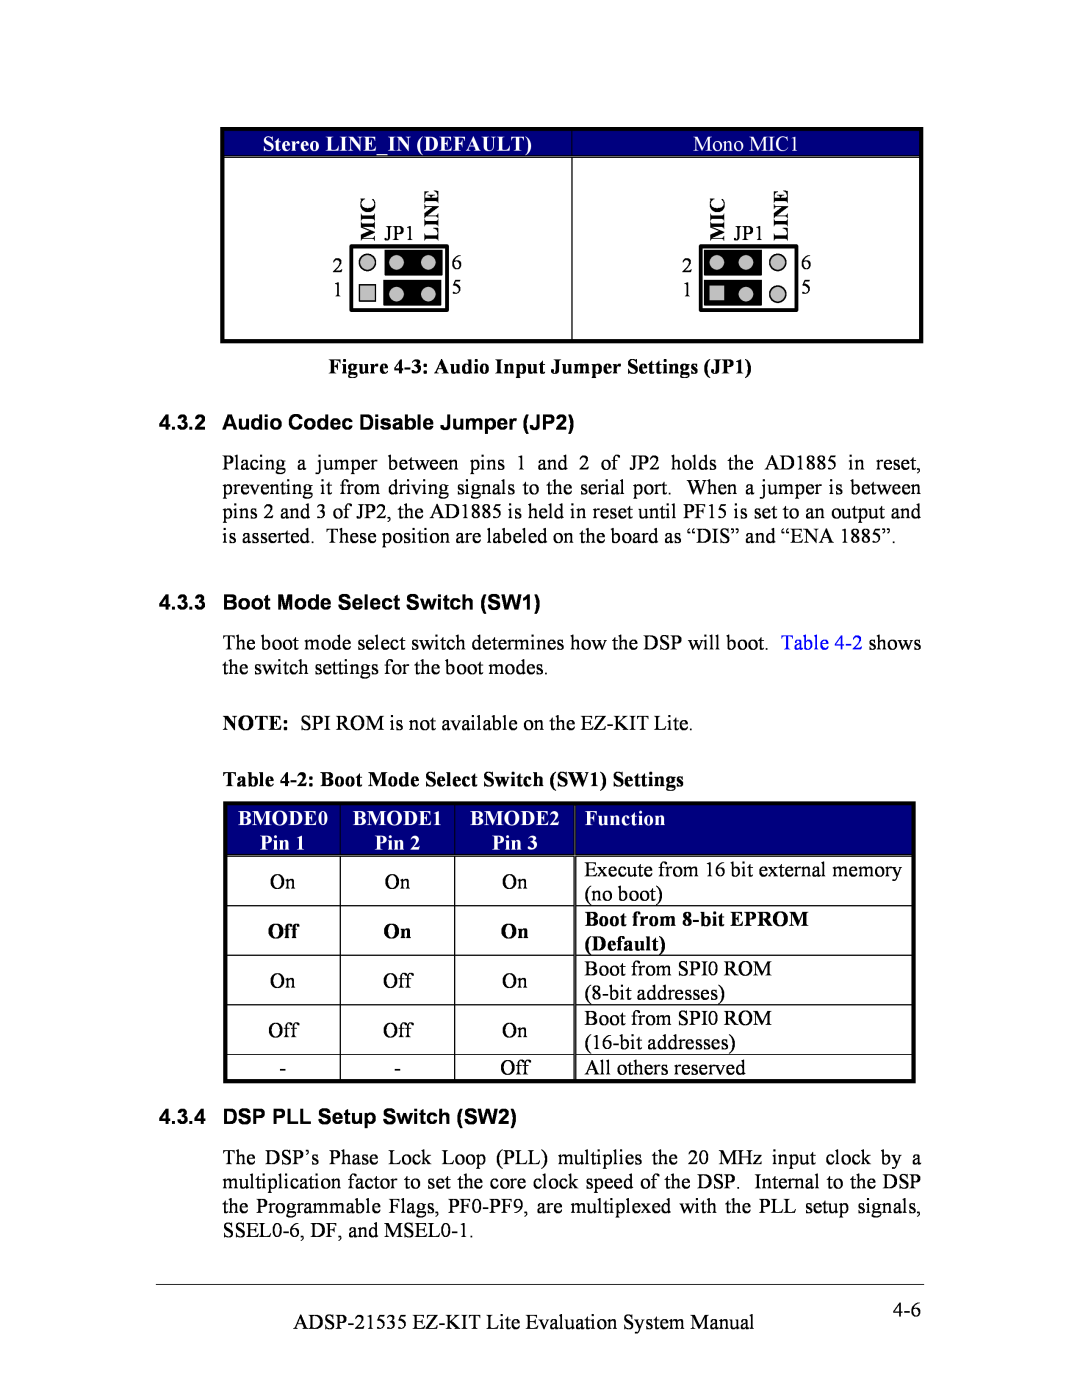 Analog Devices 82-0000603-01 Stereo LINEIN DEFAULT, 3 Audio Input Jumper Settings JP1, Audio Codec Disable Jumper JP2 